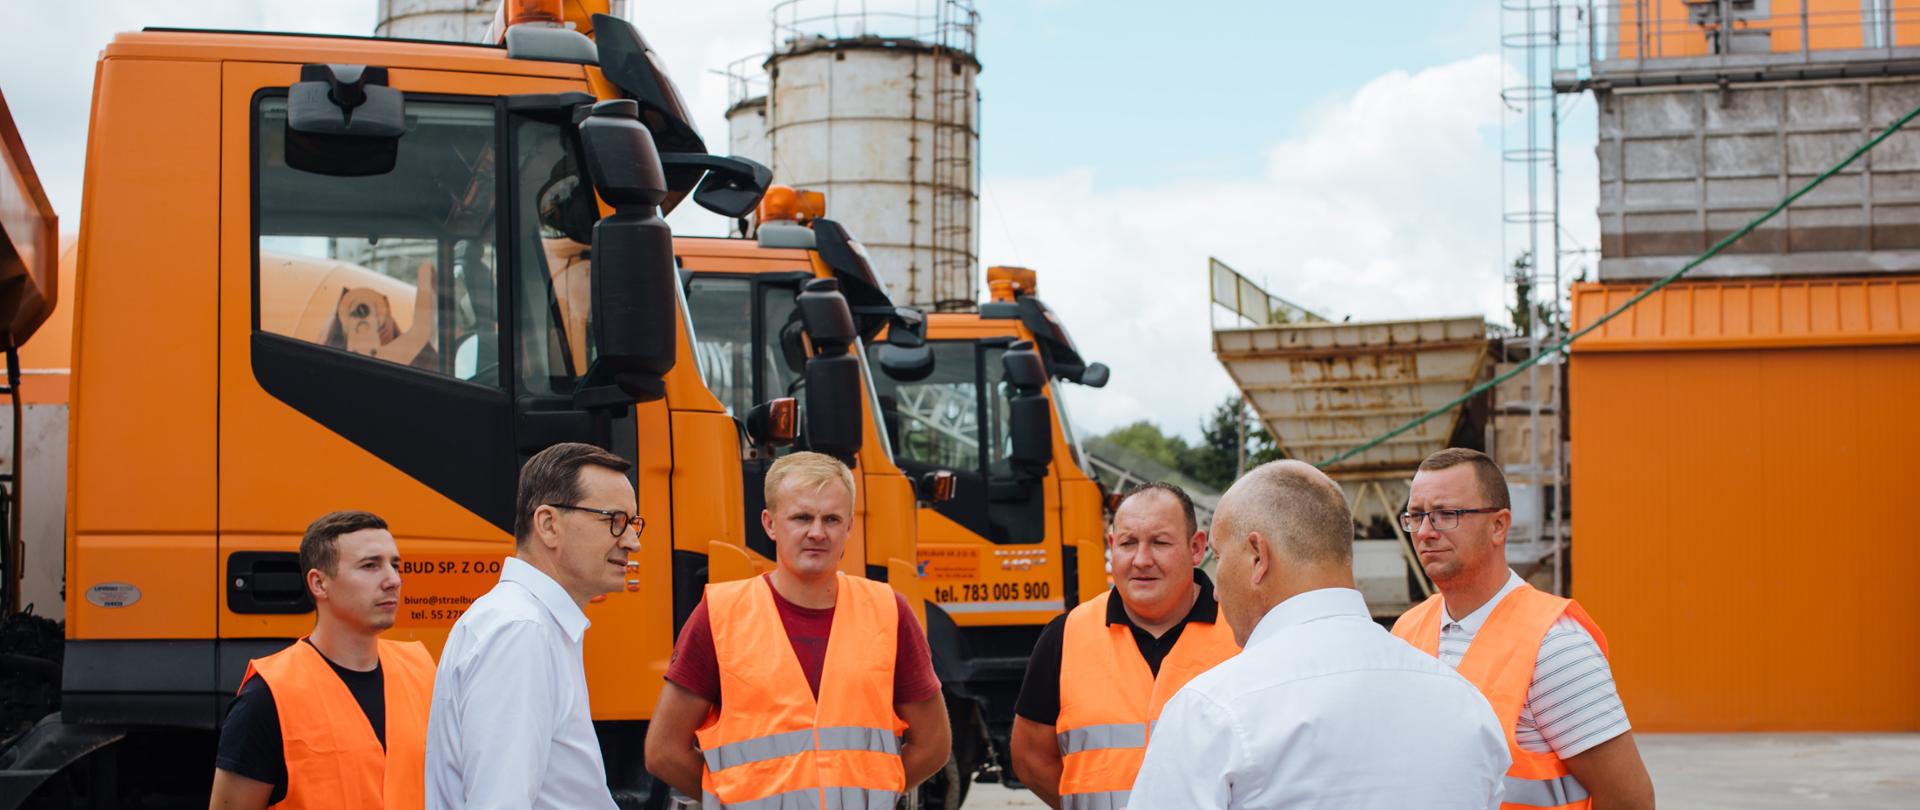 Prime Minister Mateusz Morawiecki during a visit to the Kwidzyn Road and Construction Works Company "Strzelbud".